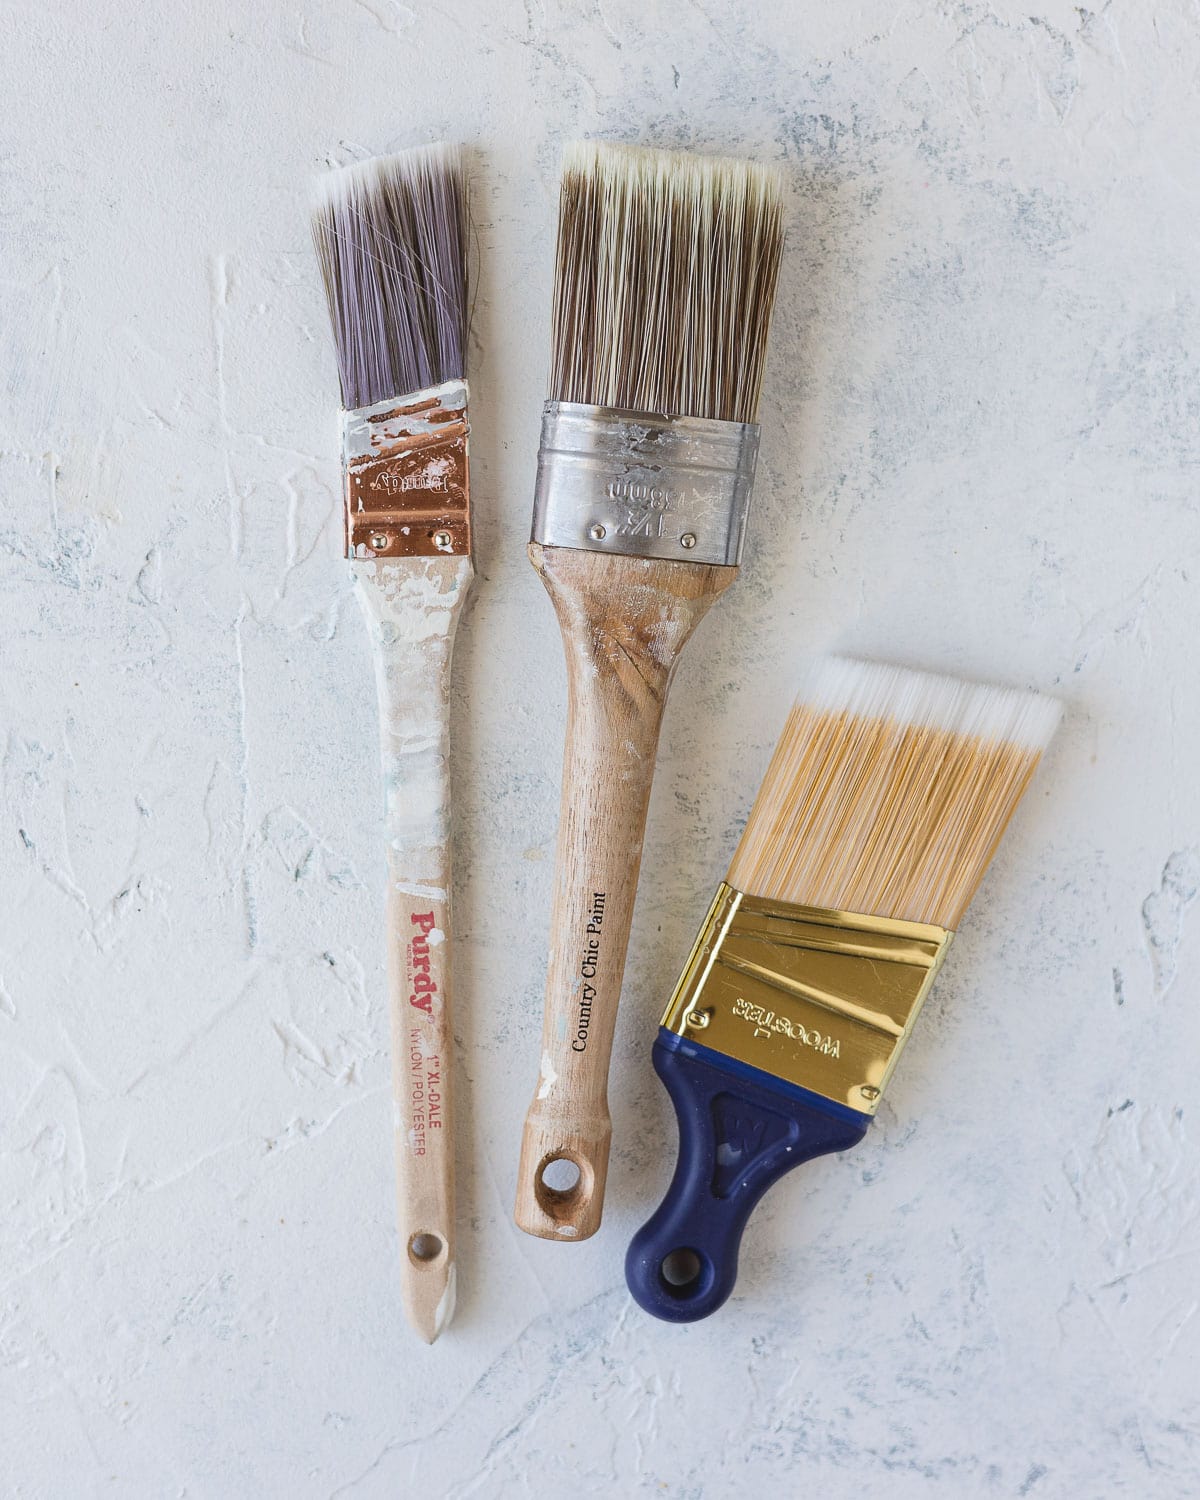 Three paint brushes on a rustic surface.